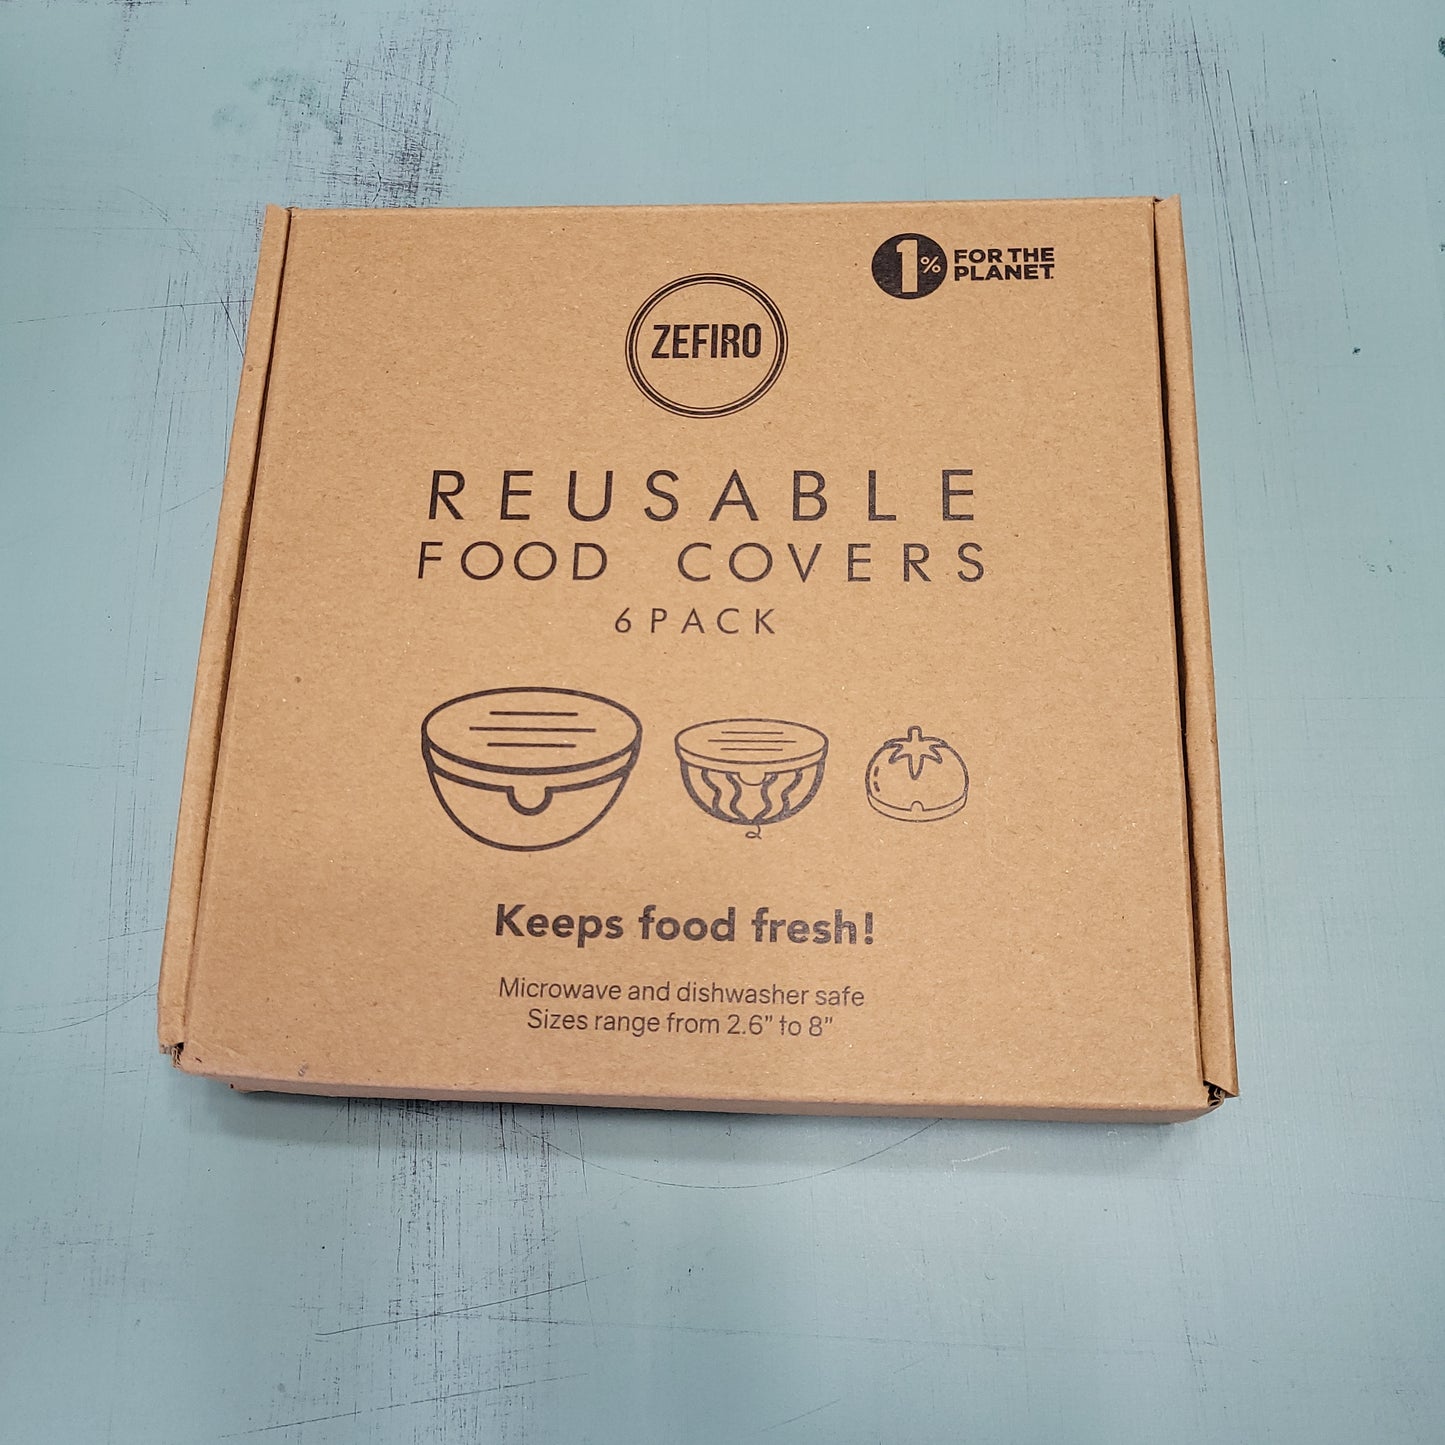 Reusable Food Covers - 6 Pack